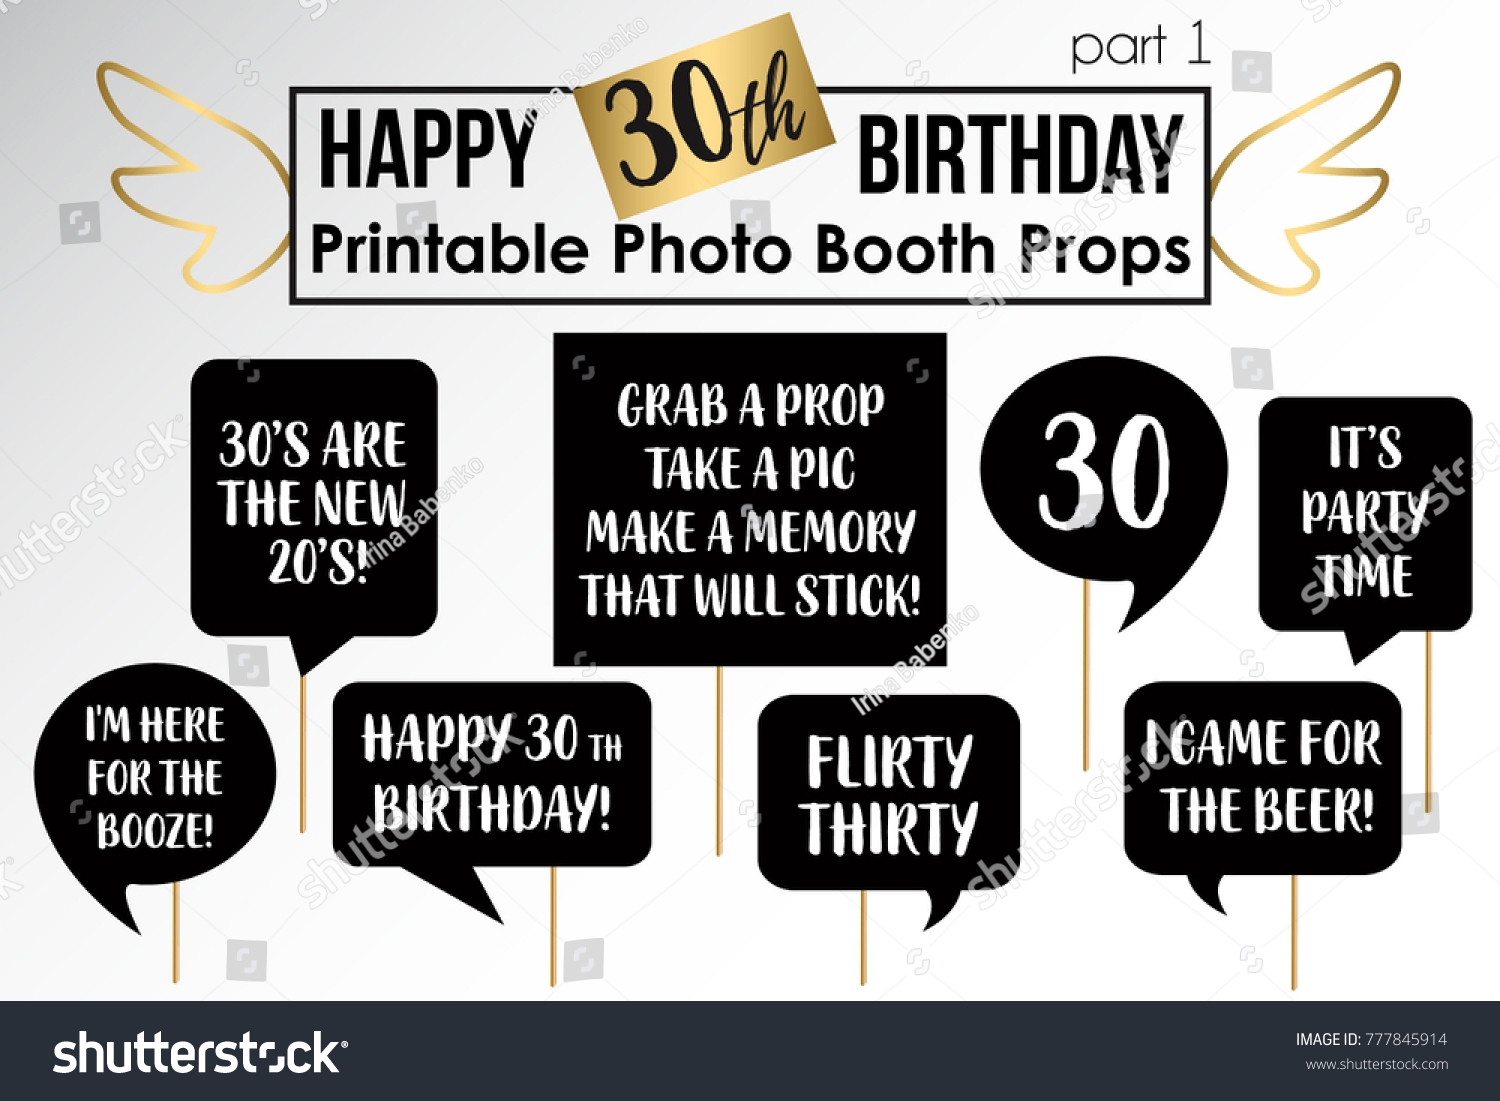 Thirtieth Birthday Party Printable Photo Booth Stock Vector Royalty Free 777845914 Shutterstock - Free Printable 30Th Birthday Photo Booth Props